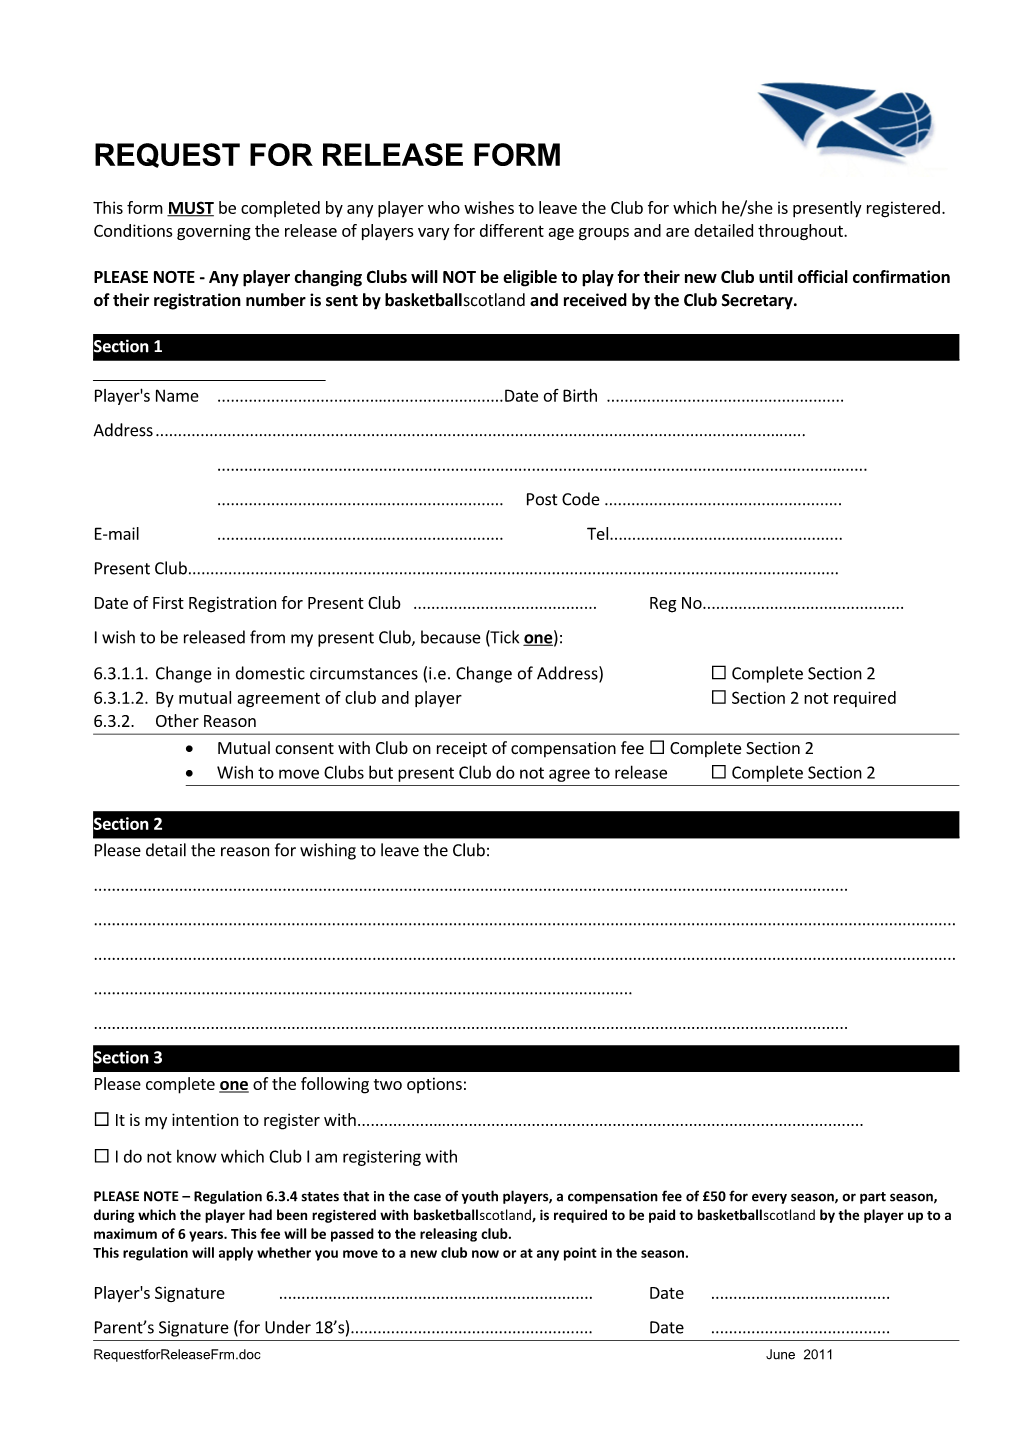 Request for Release Form